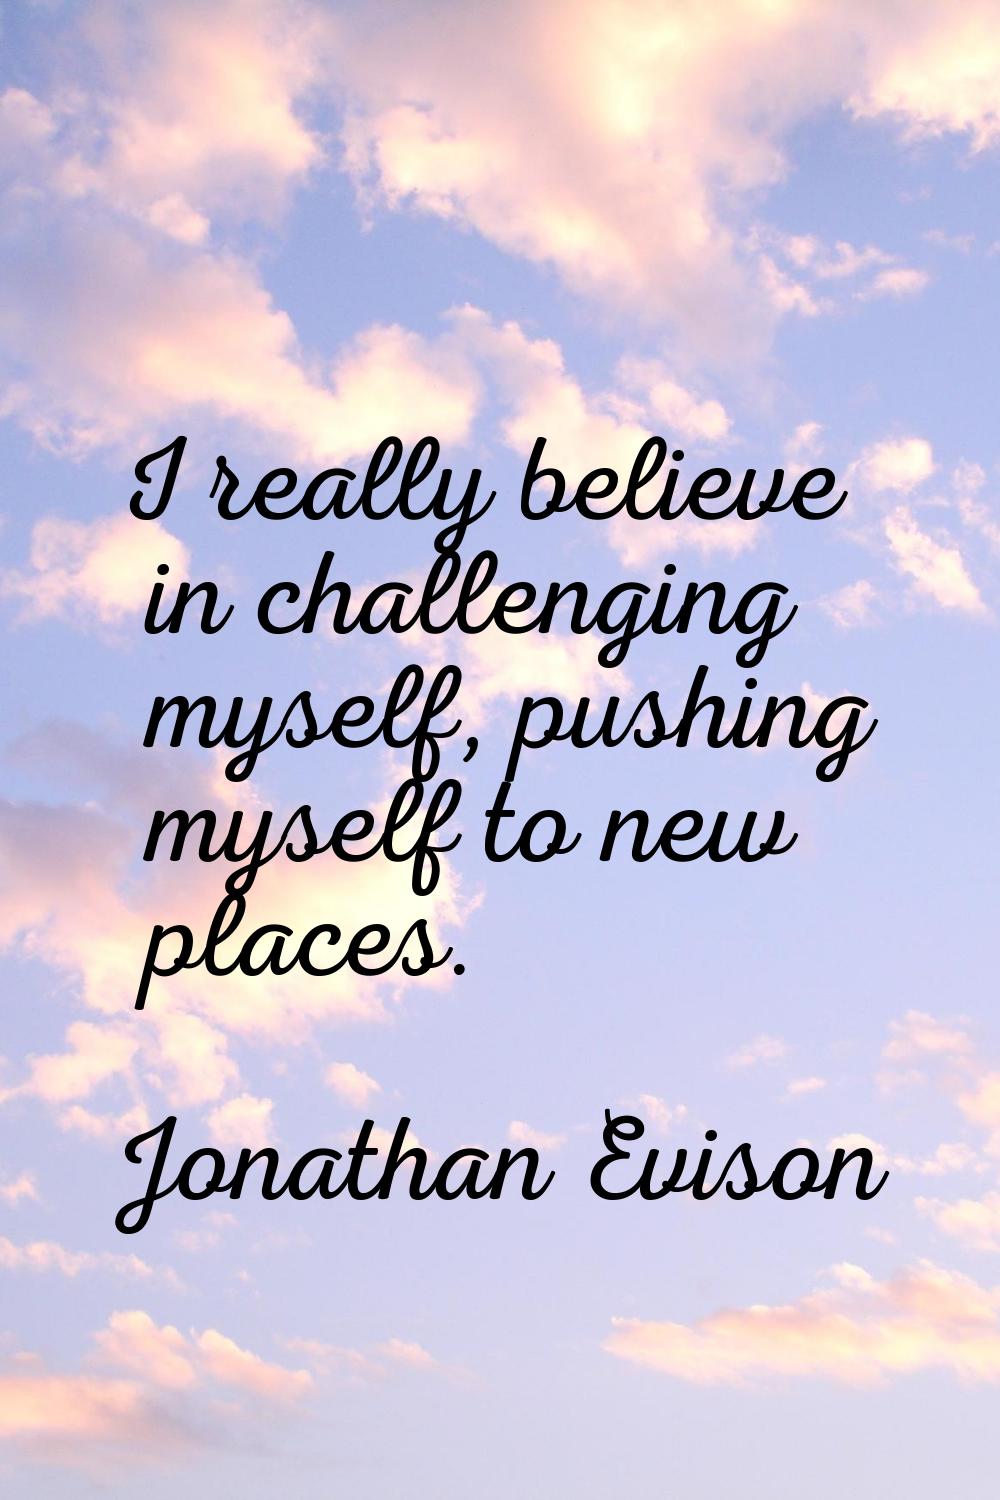 I really believe in challenging myself, pushing myself to new places.